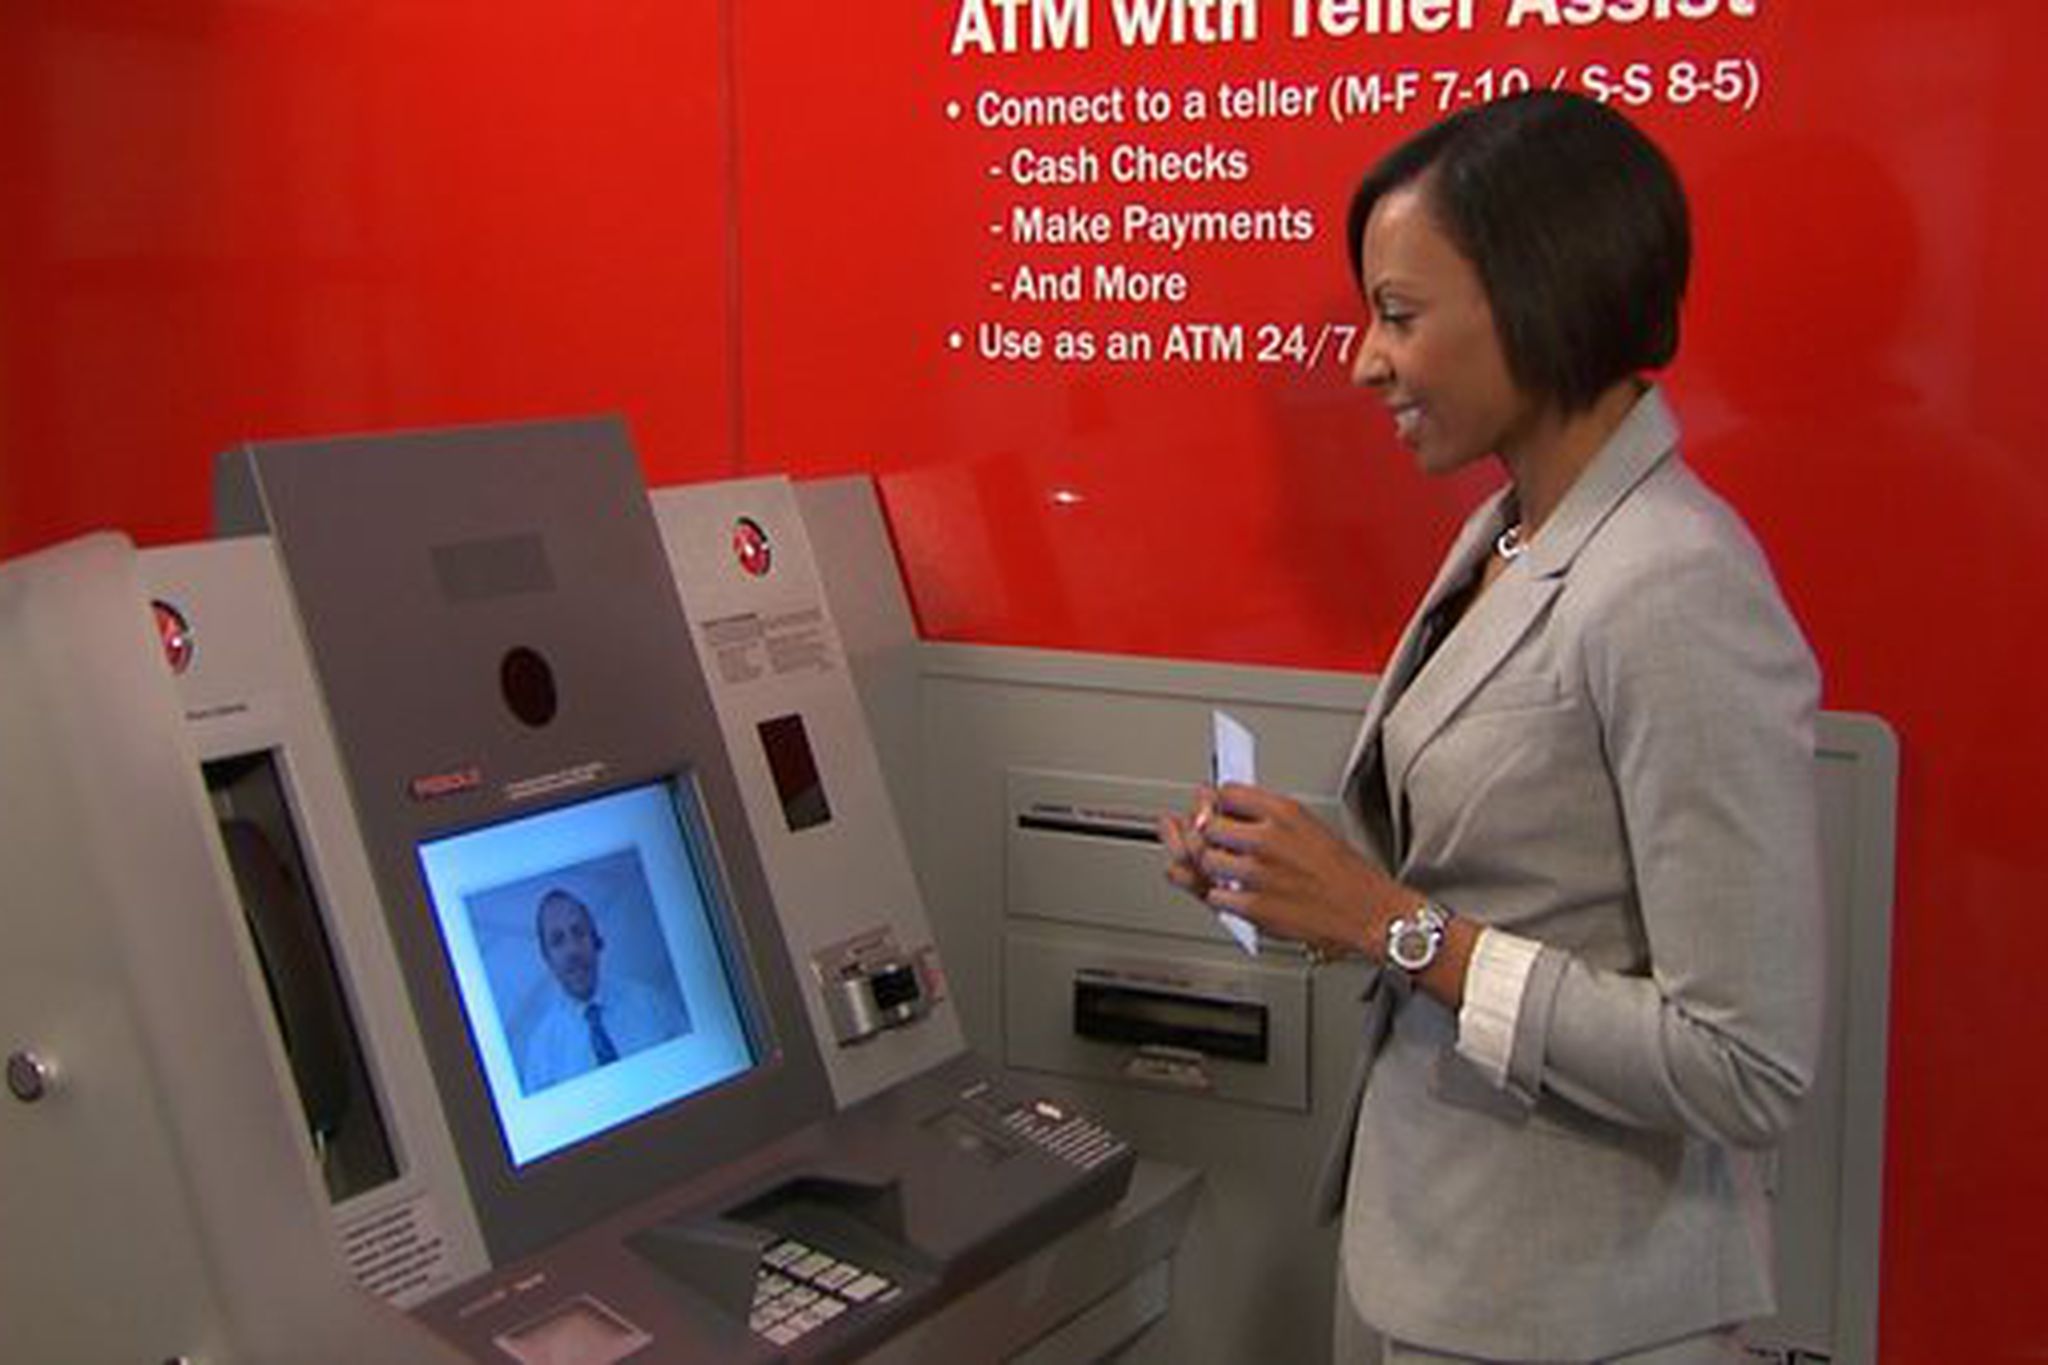 Bank Of America Launches Atms With Teller Assist Brings Video Chat To Cash Machines The Verge 3053